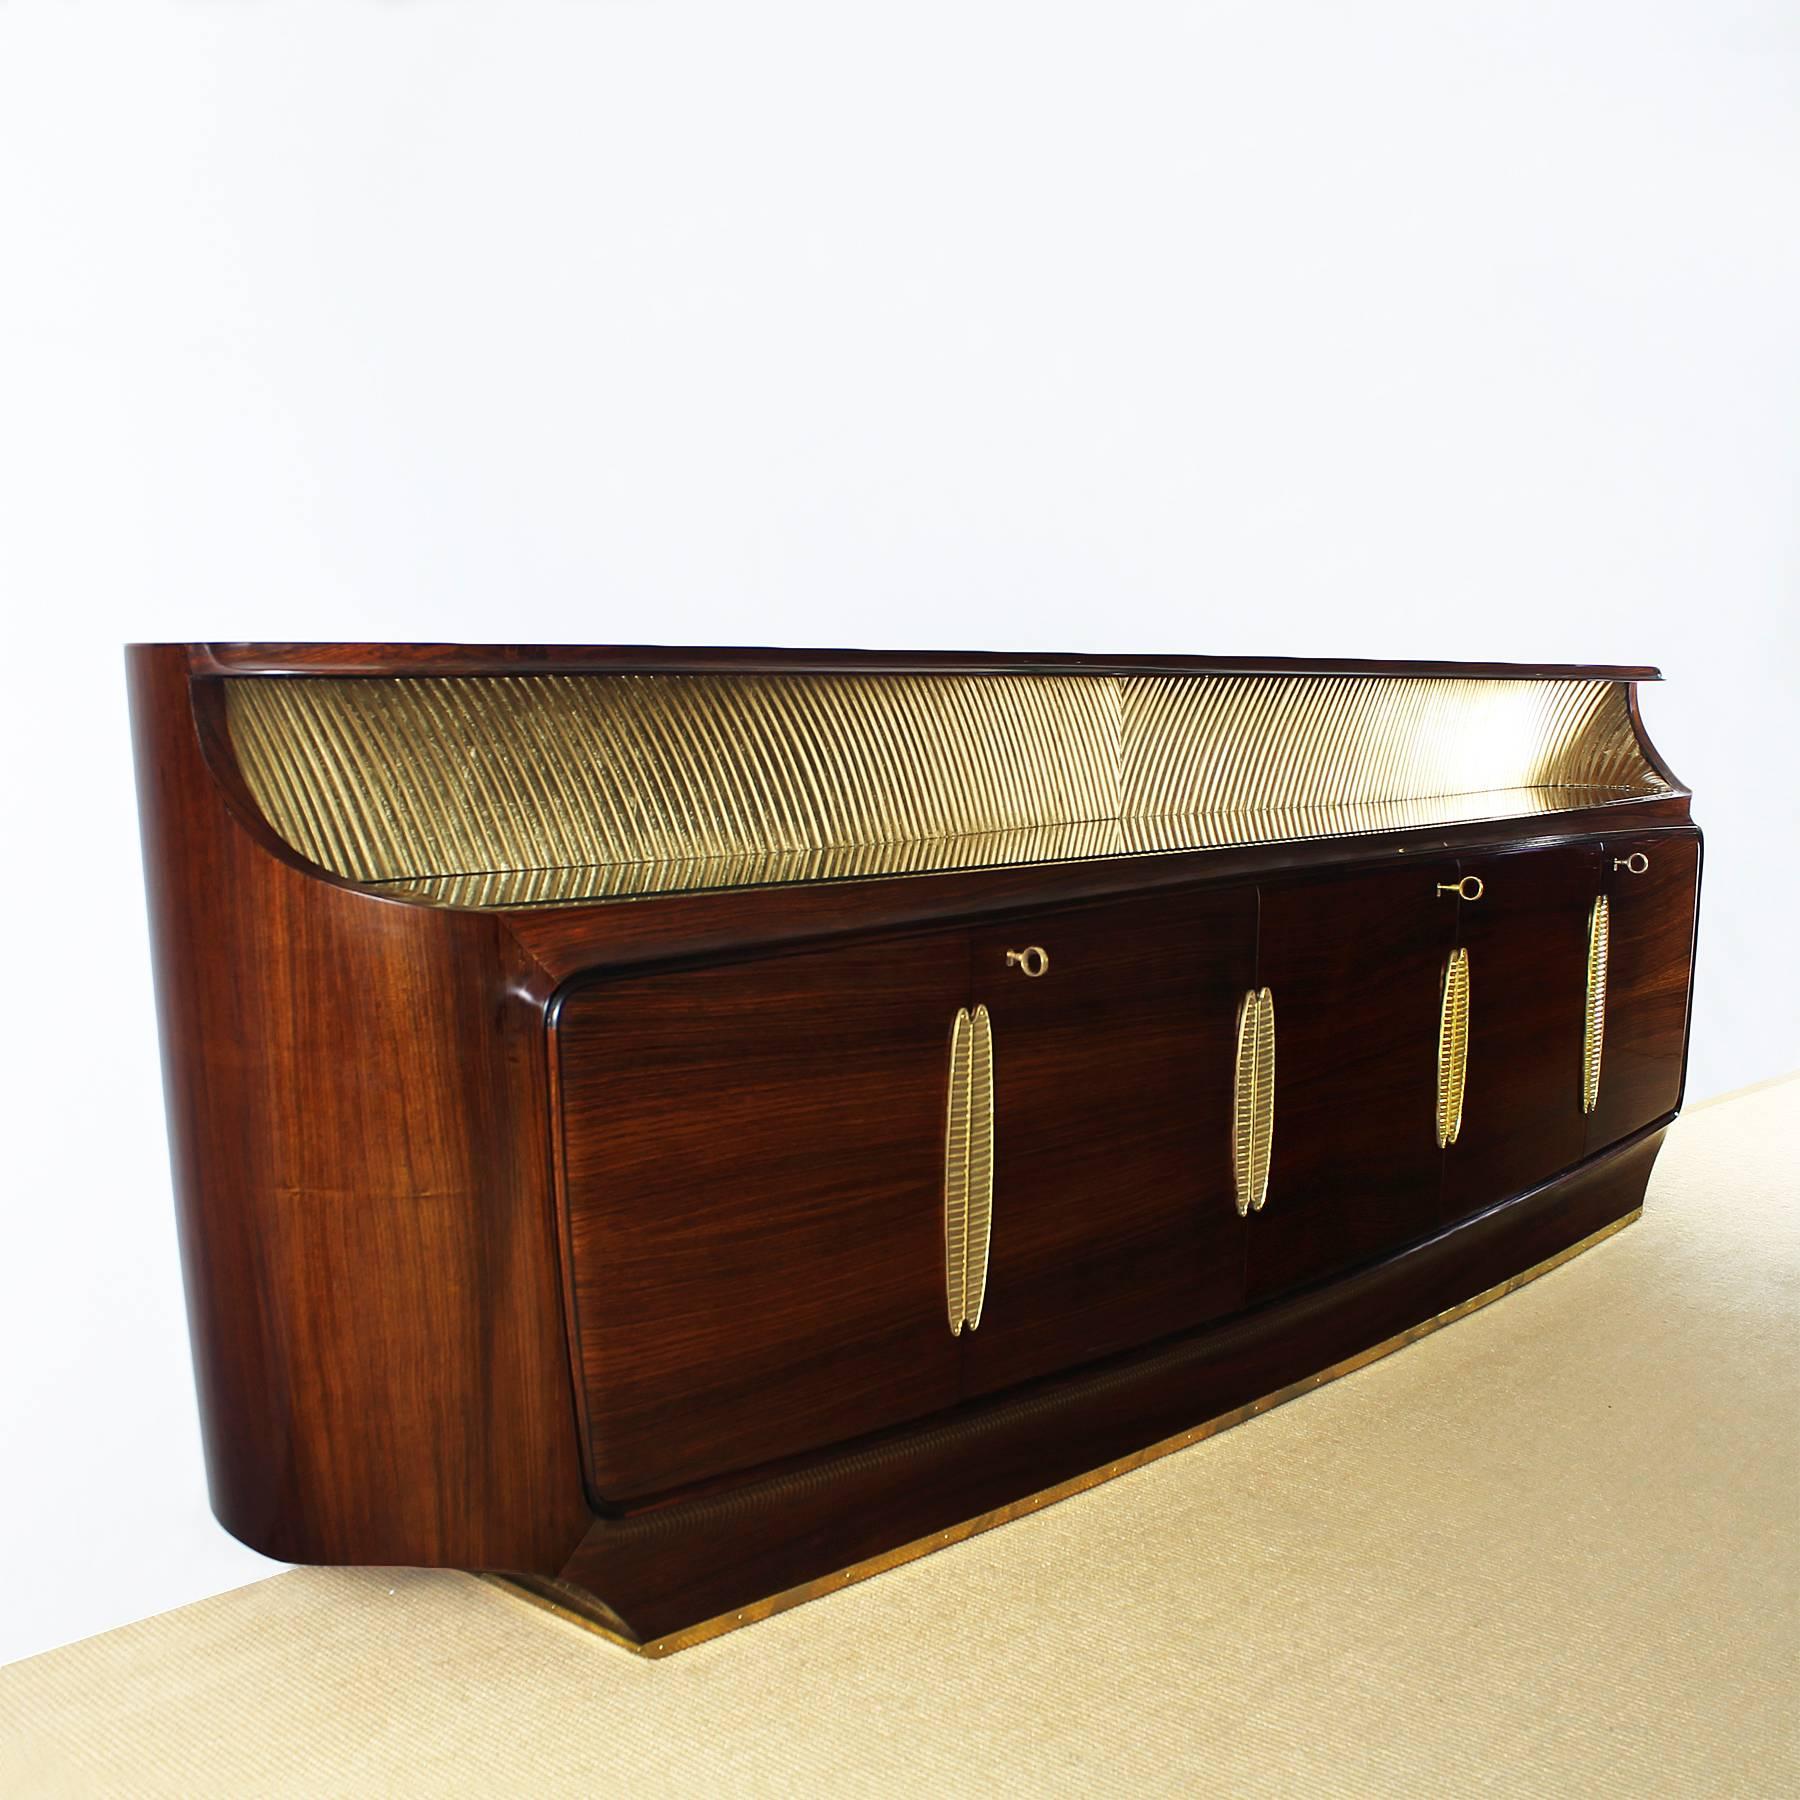 Spectacular rounded sideboard, high cabinet-making quality, rosewood veneer, French polish, five doors, the four side ones with shelves and the middle one with drawers, ivory lacquered wood inside. Decorative undulant gold leaf panel and original